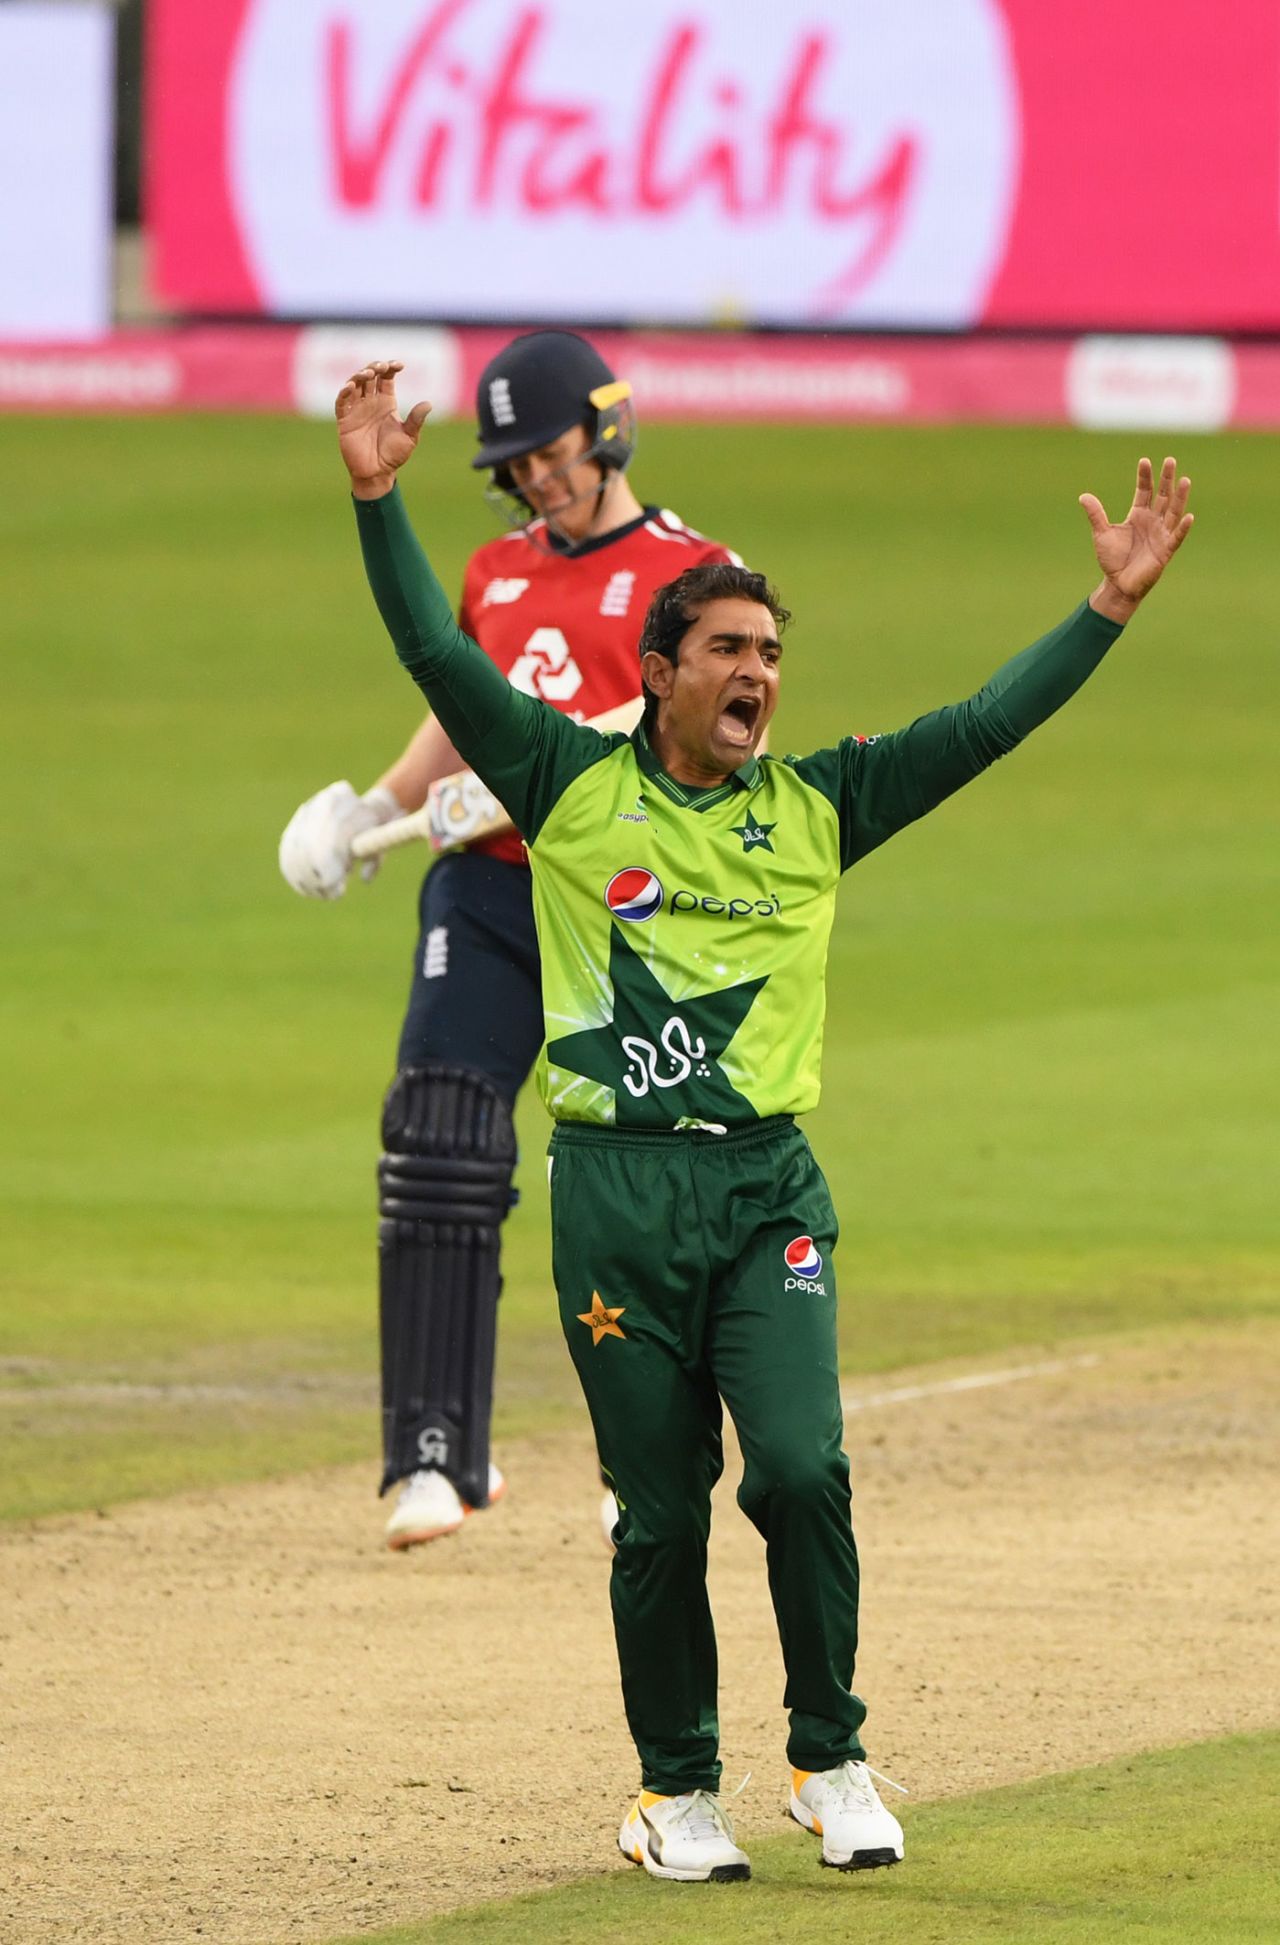 Iftikhar Ahmed trapped Eoin Morgan lbw, England v Pakistan, 1st T20I, Old Trafford, August 28, 2020